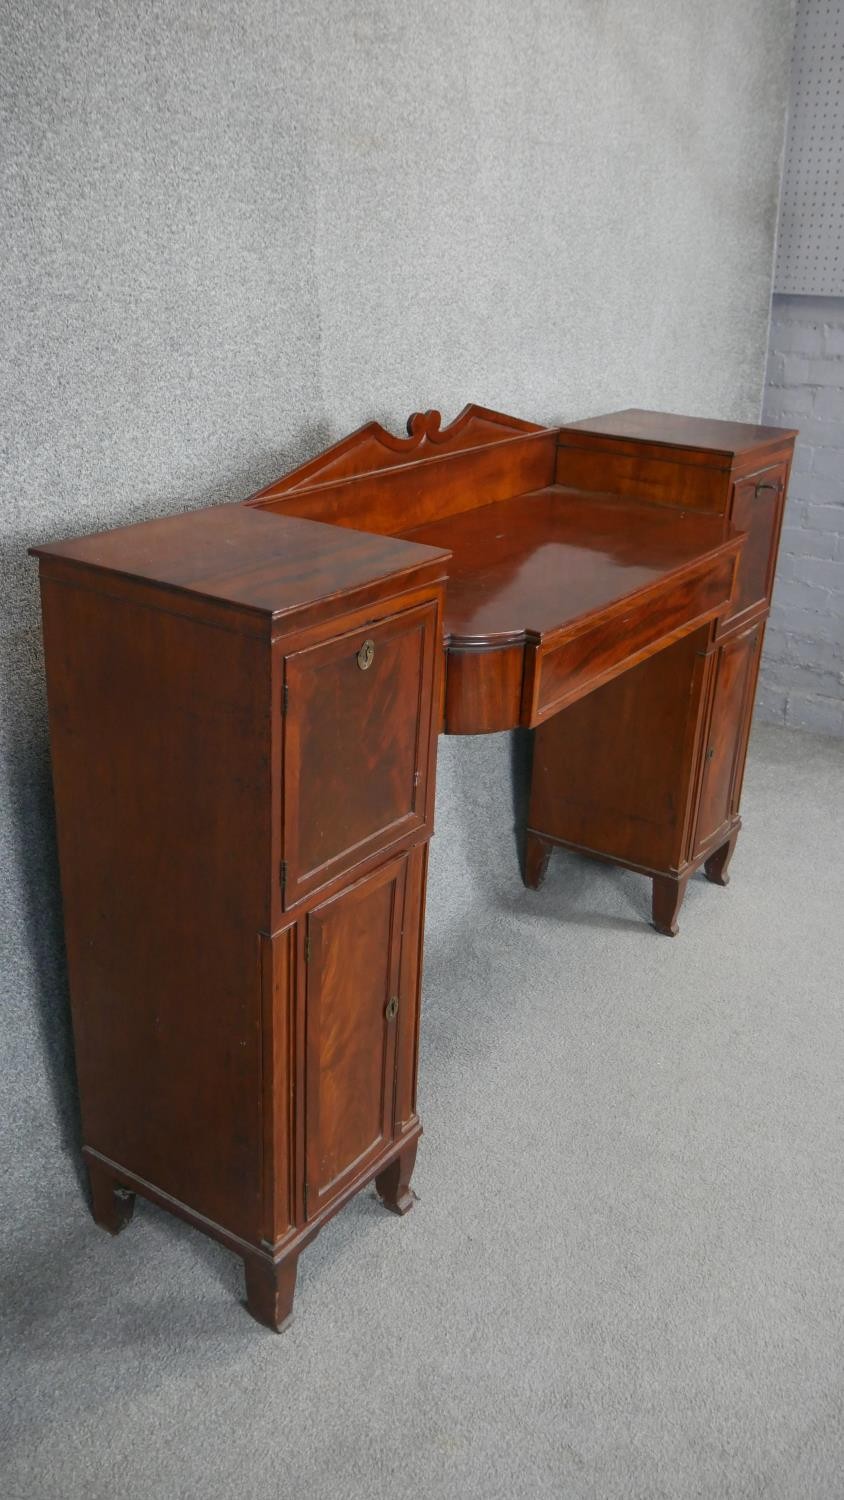 A Regency mahogany twin pedestal sideboard with flame mahogany panel doors flanked by pilasters on - Image 2 of 5